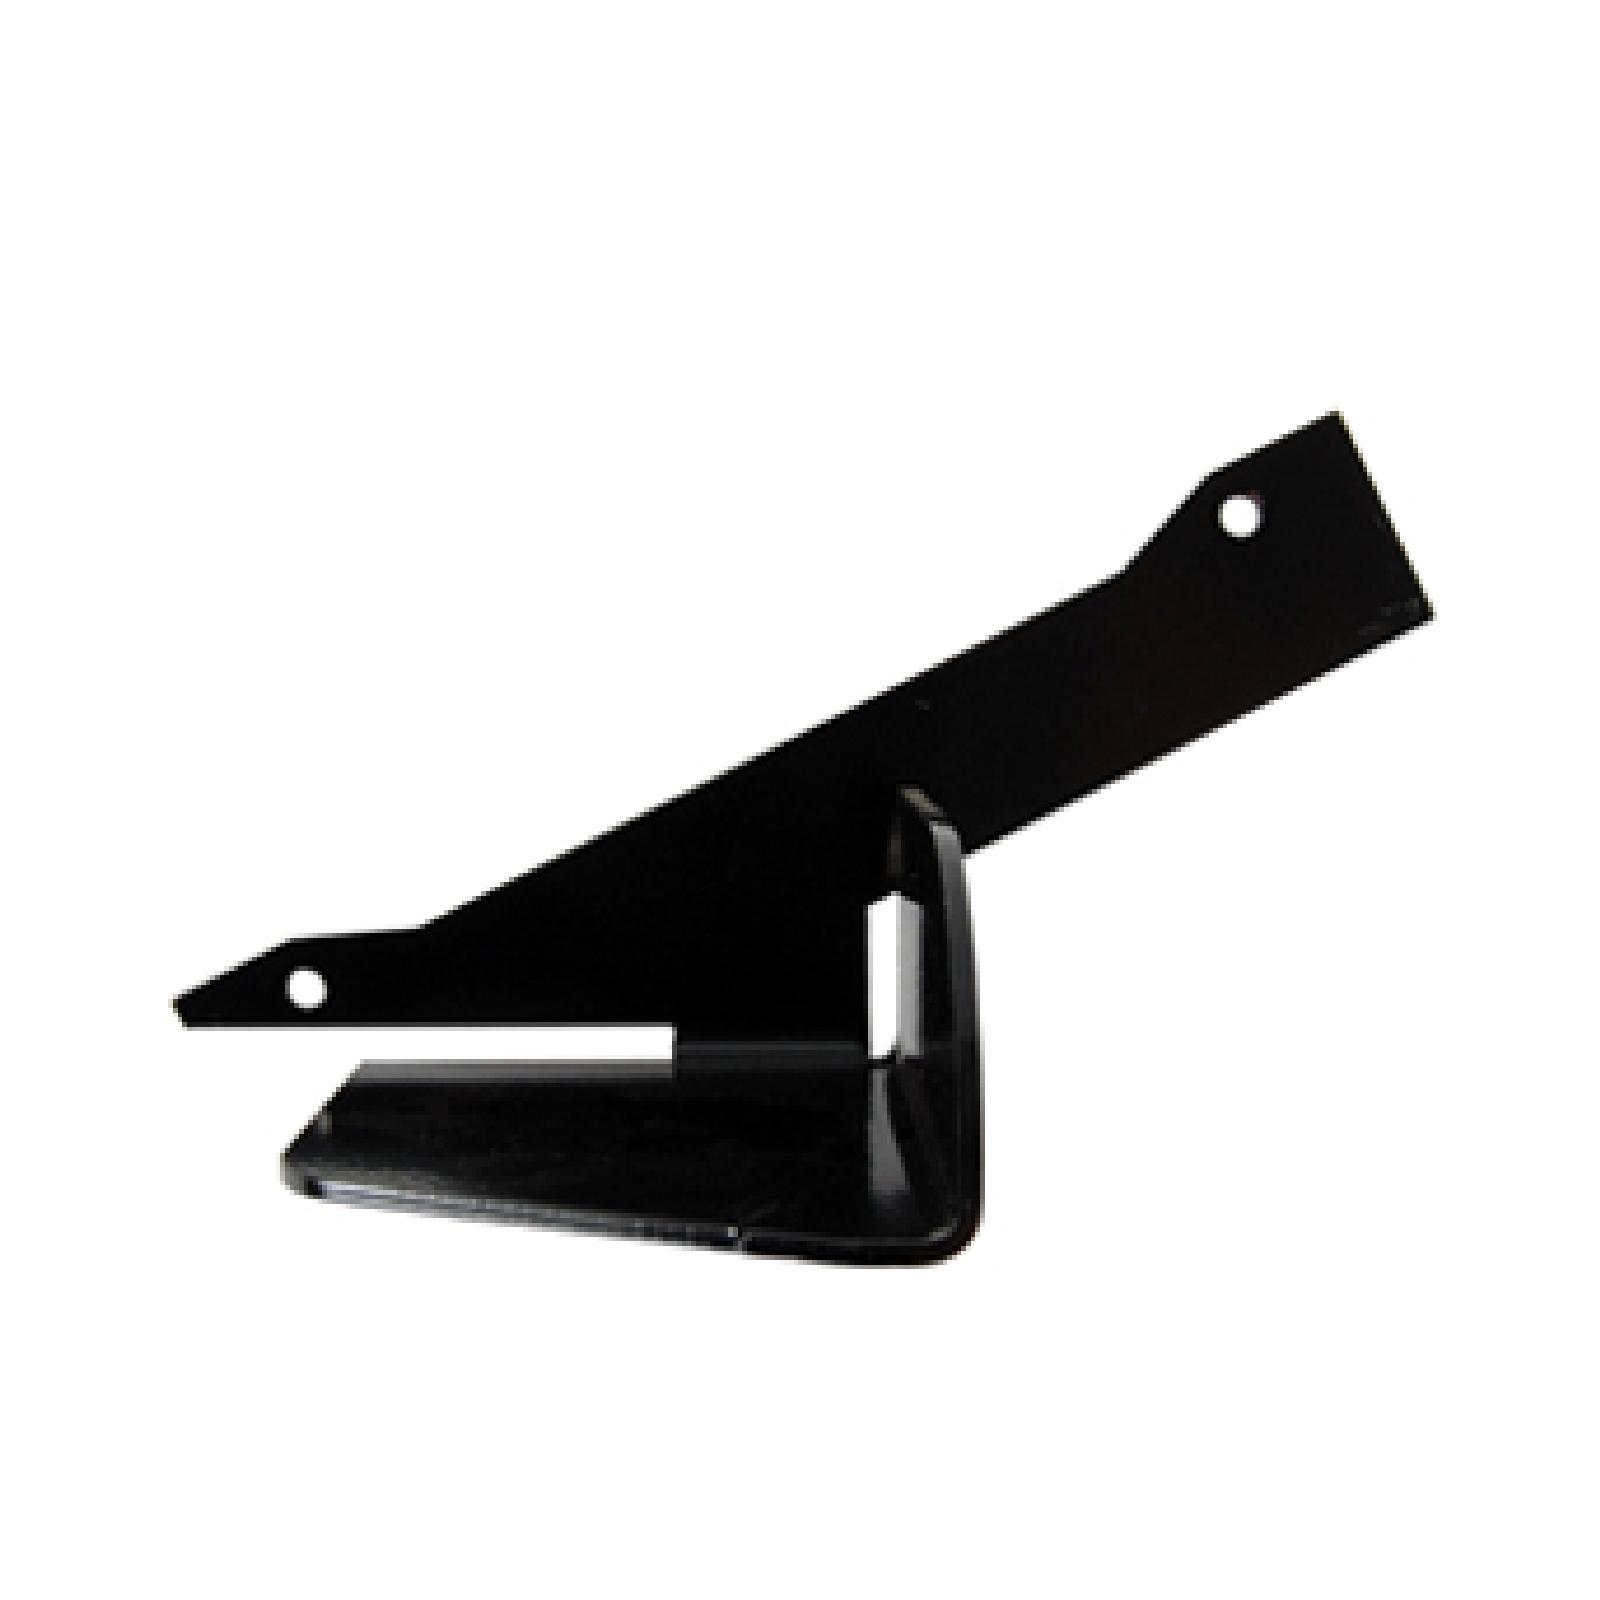 GRIP HANDLE BLK part# 7200274 by MTD